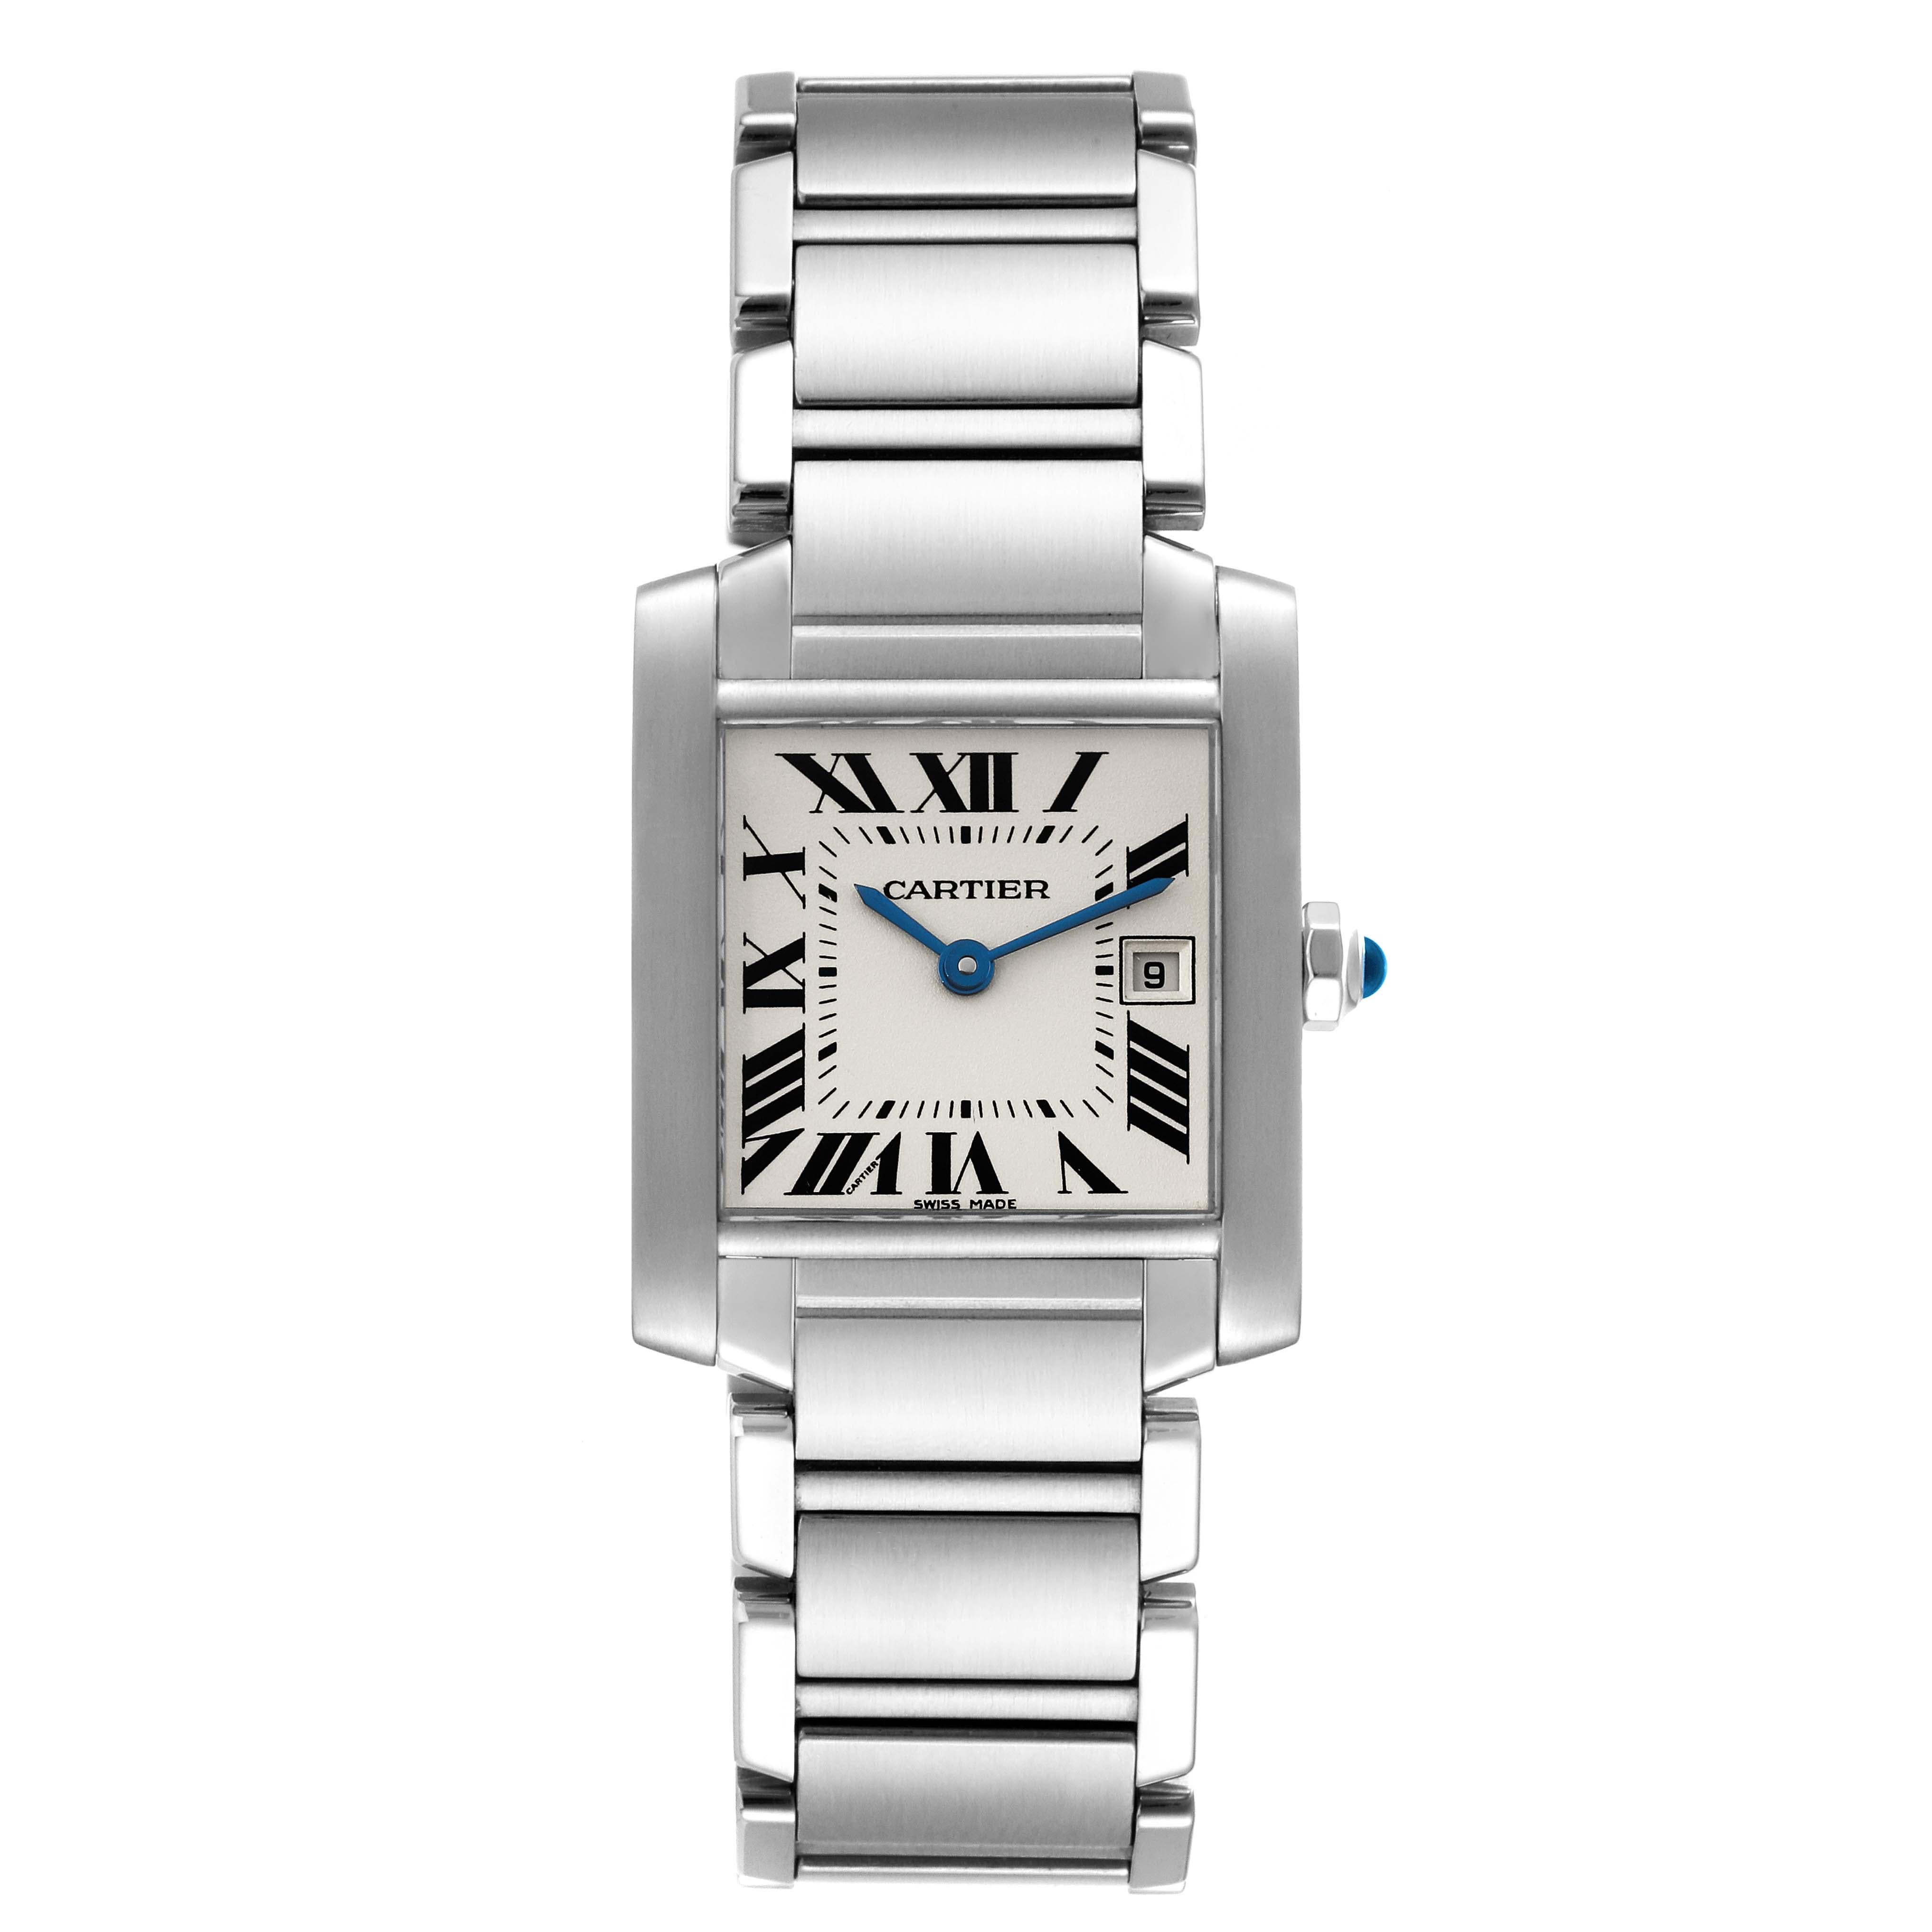 Cartier Tank Francaise Midsize Silver Dial Steel Ladies Watch W51011Q3. Quartz movement. Rectangular stainless steel 25.0 X 30.0 mm case. Octagonal crown set with a blue spinel cabochon. . Scratch resistant sapphire crystal. Silvered dial with black